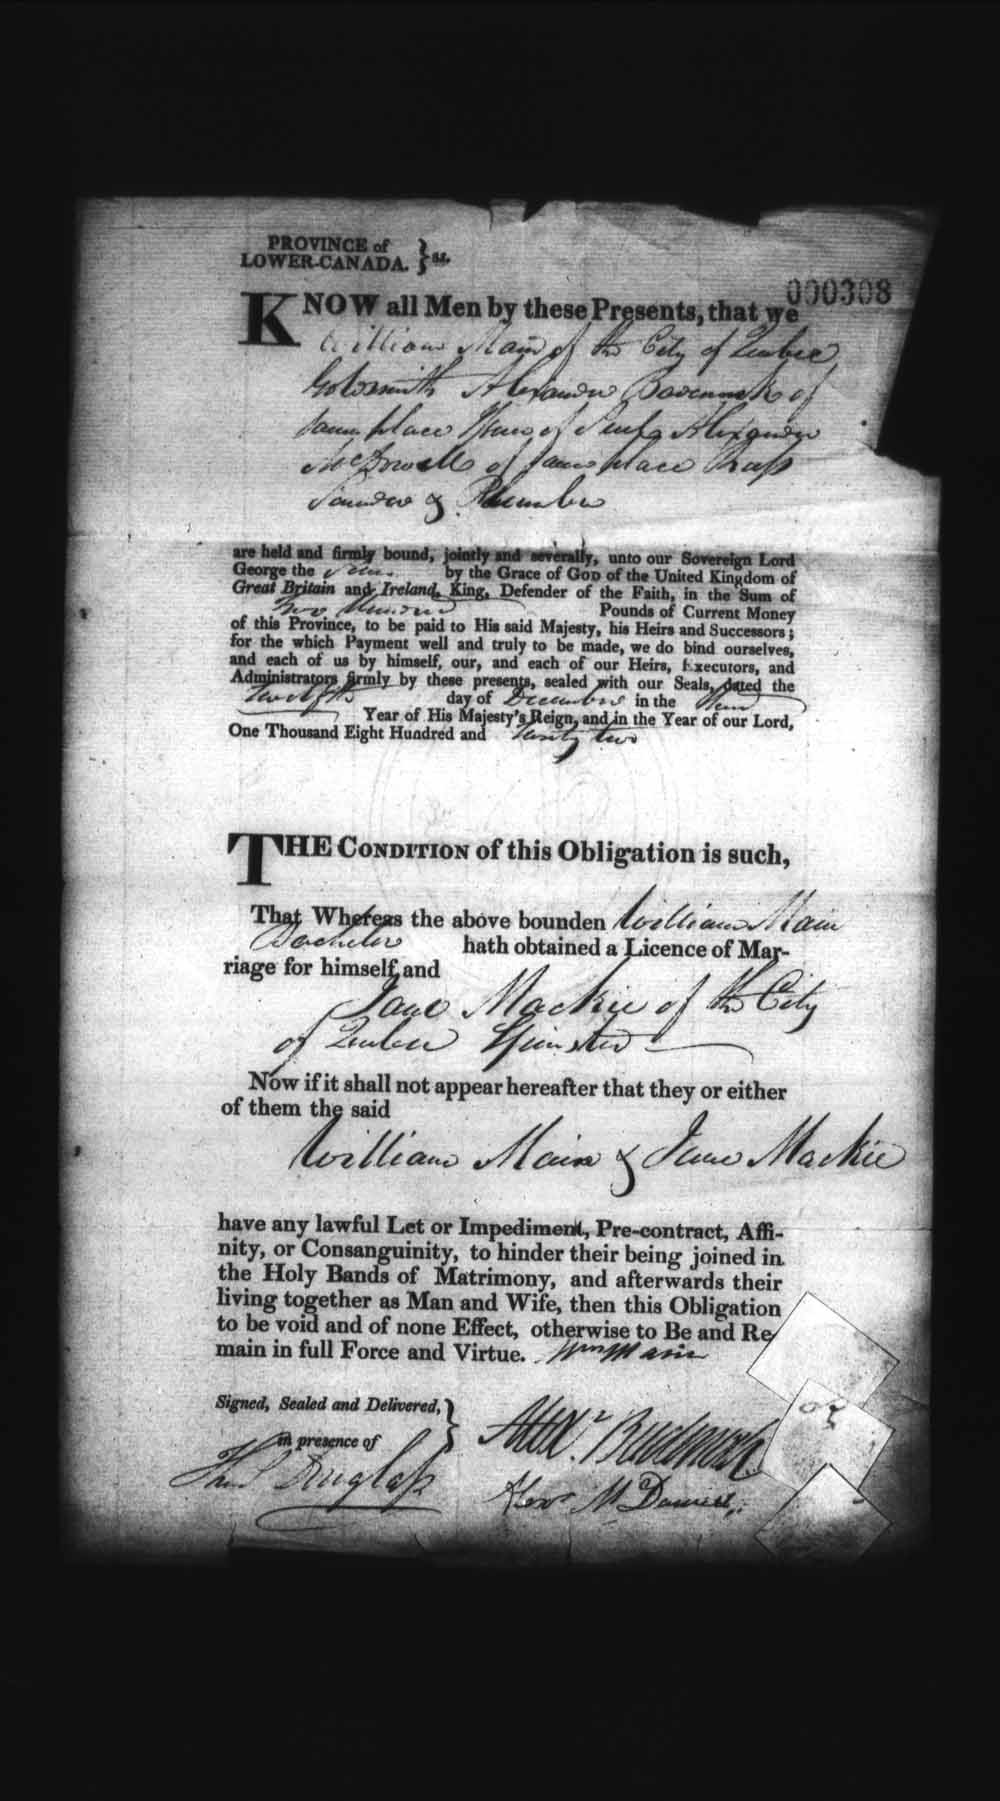 Digitized page of Upper and Lower Canada Marriage Bonds (1779-1865) for Image No.: e008236184